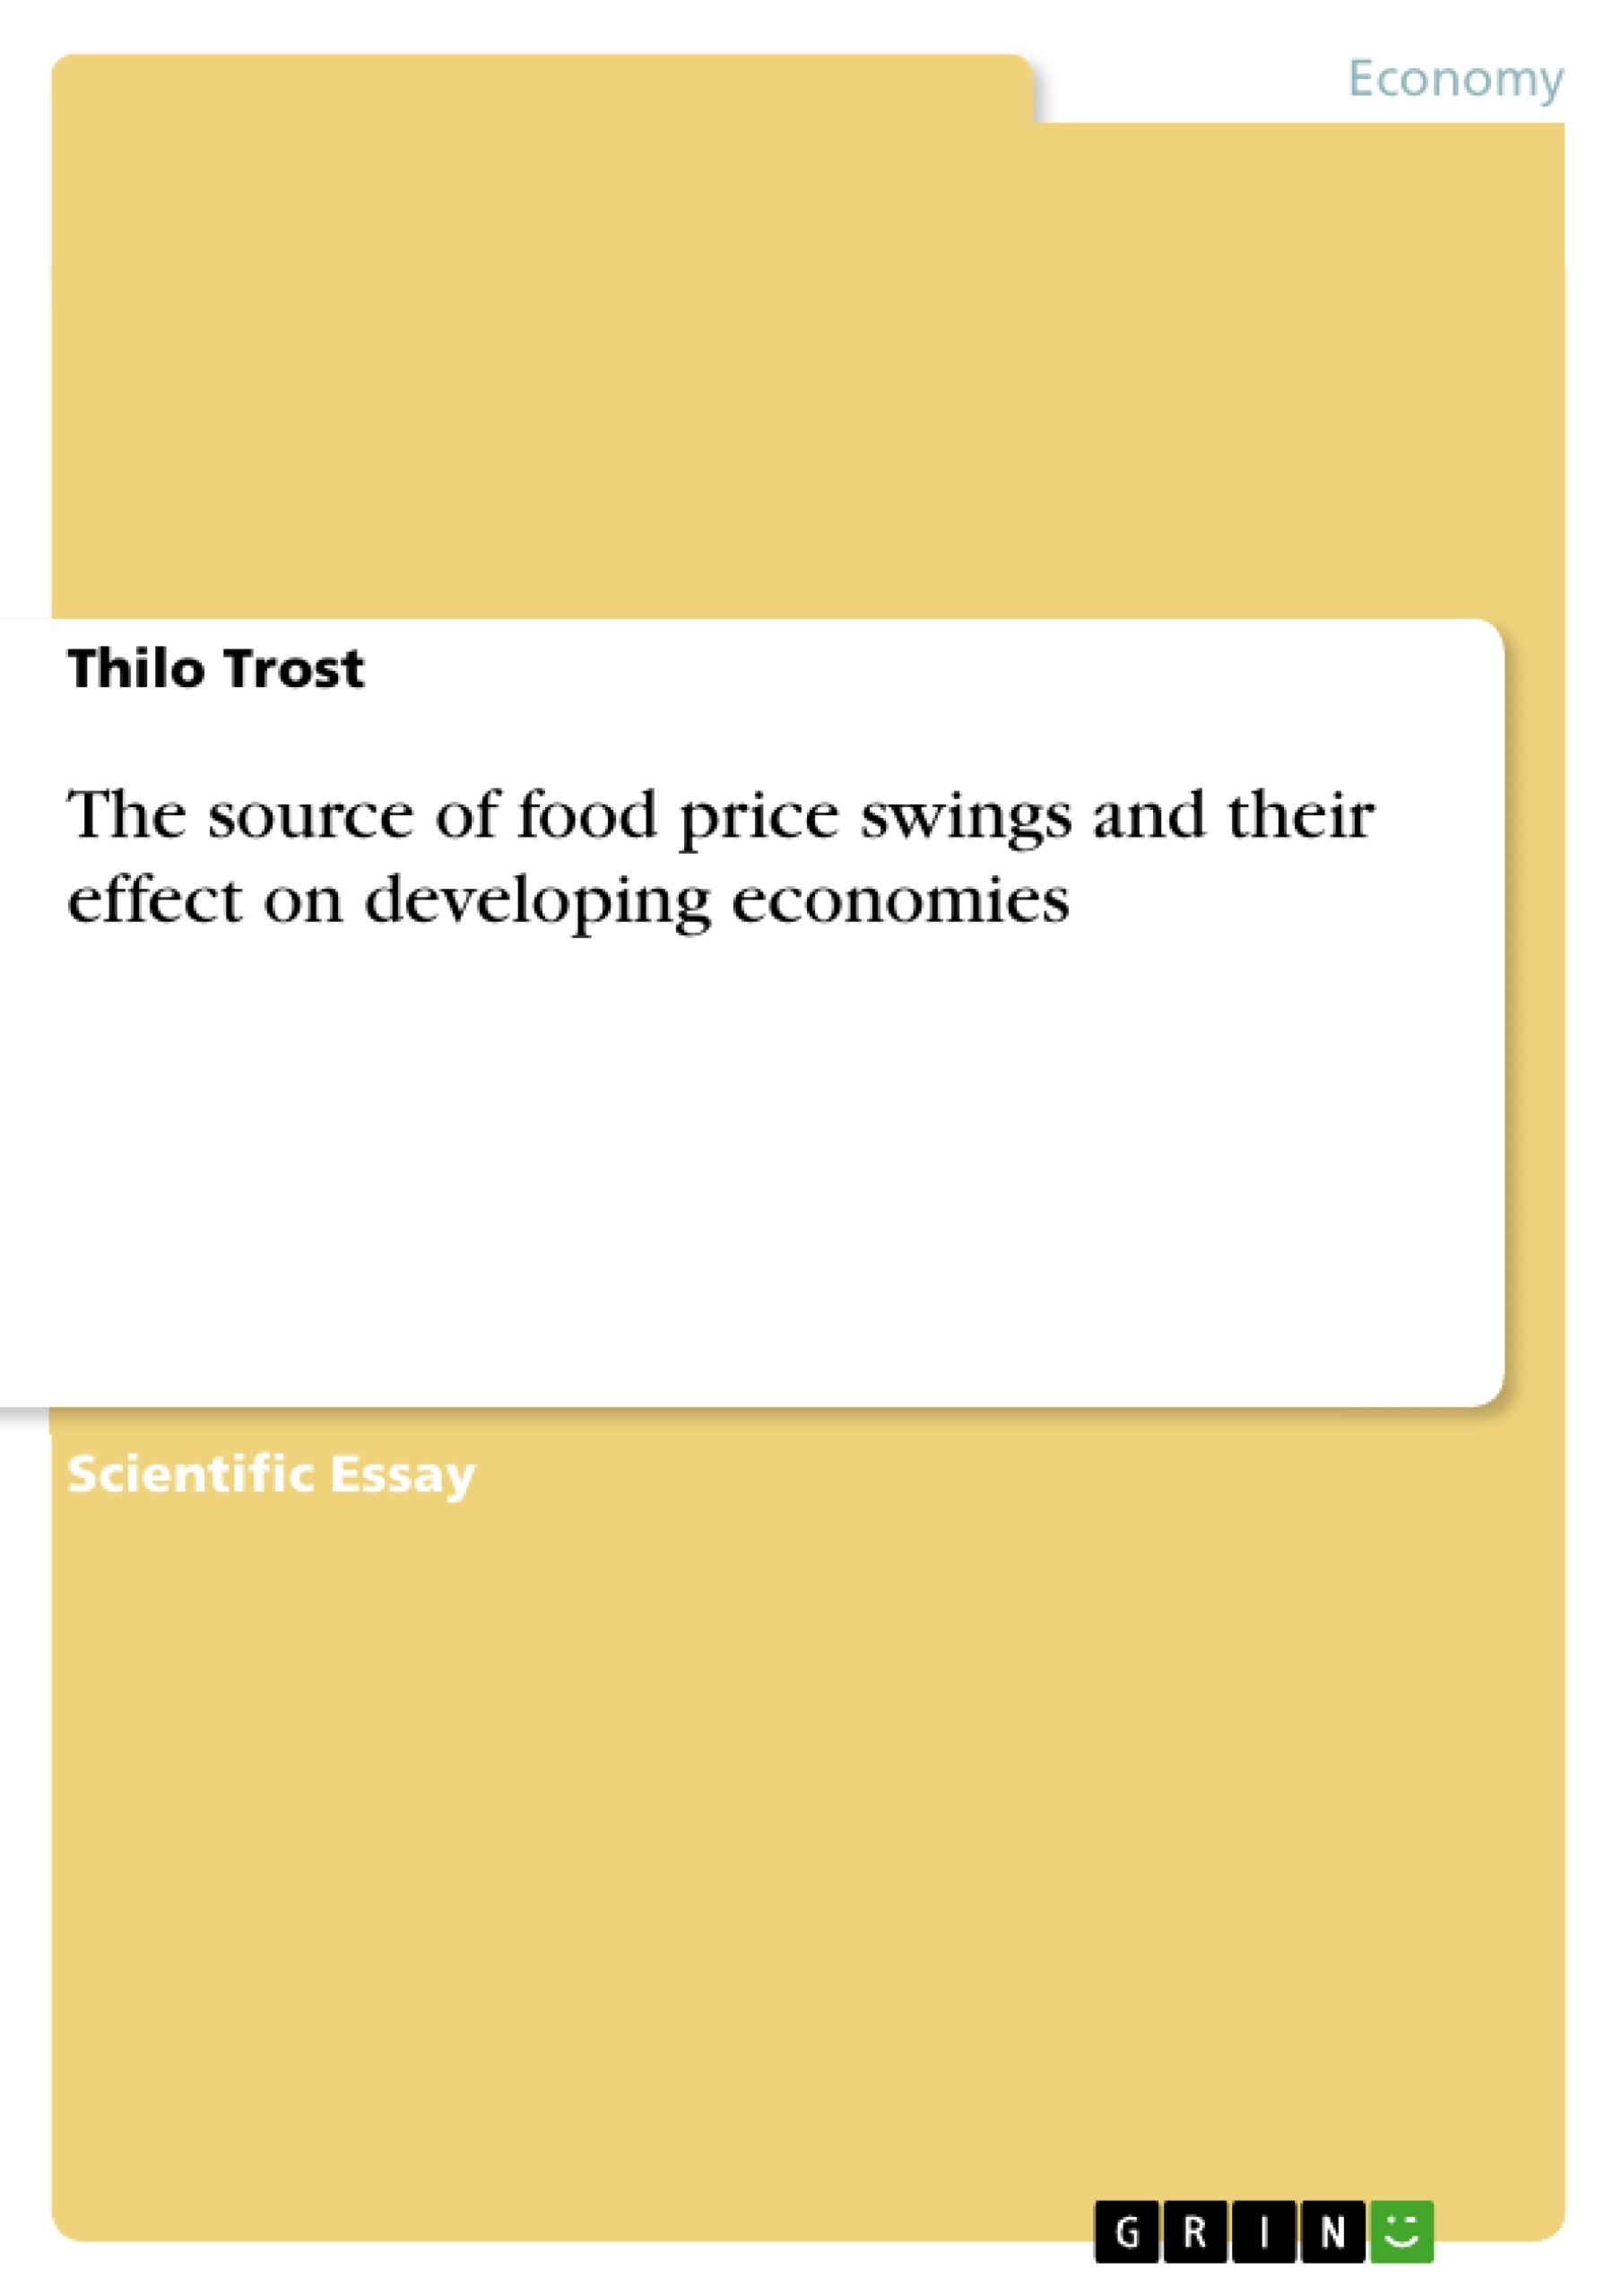 Title: The source of food price swings and their effect on developing economies